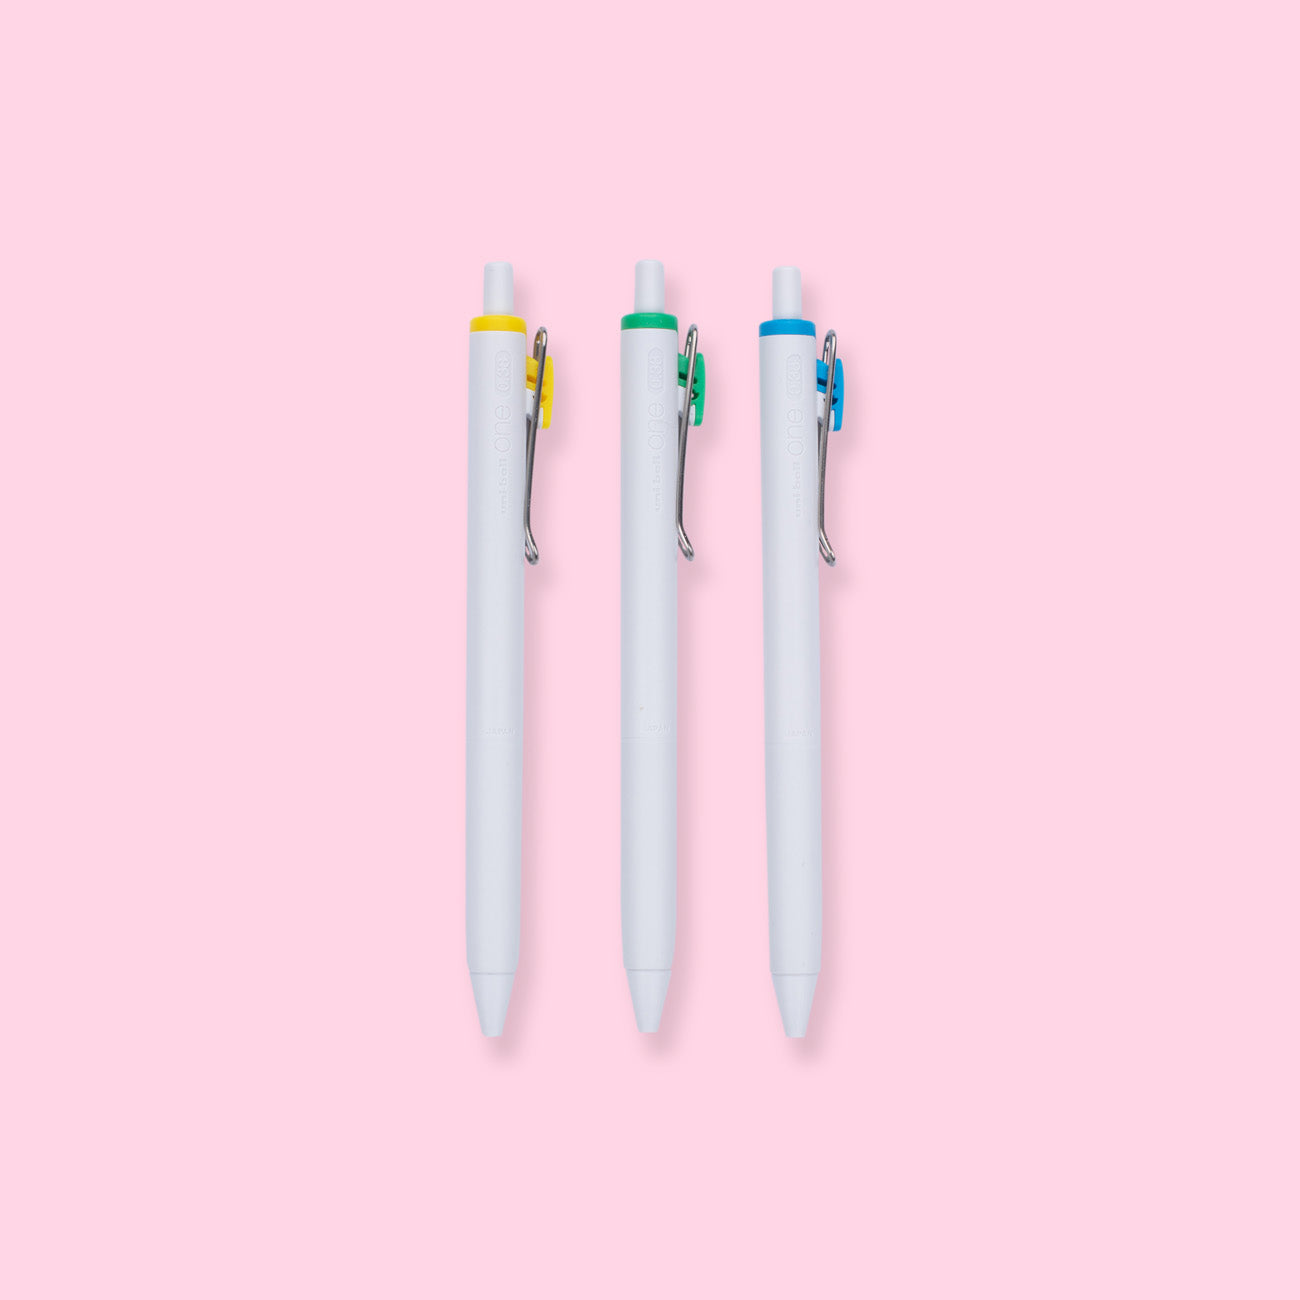 Uni-Ball One Weekend Limited Edition Gel Pen Set - 0.38 mm - Saturday Morning - Stationery Pal